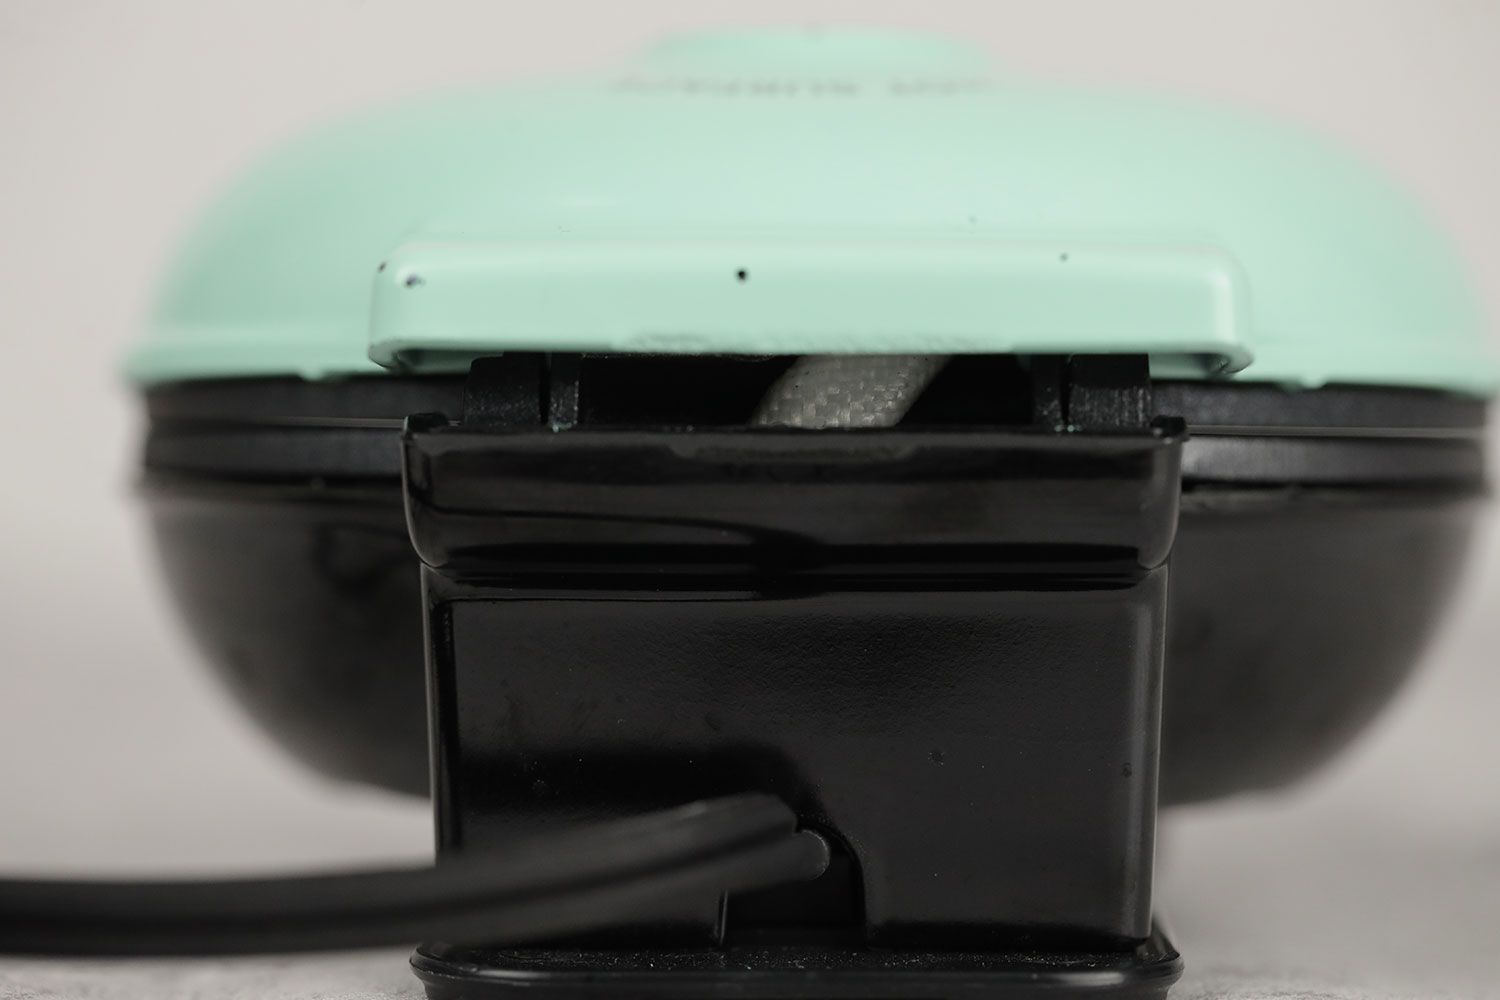 The Dash Mini Waffle Maker is Adorable — But Does It Work